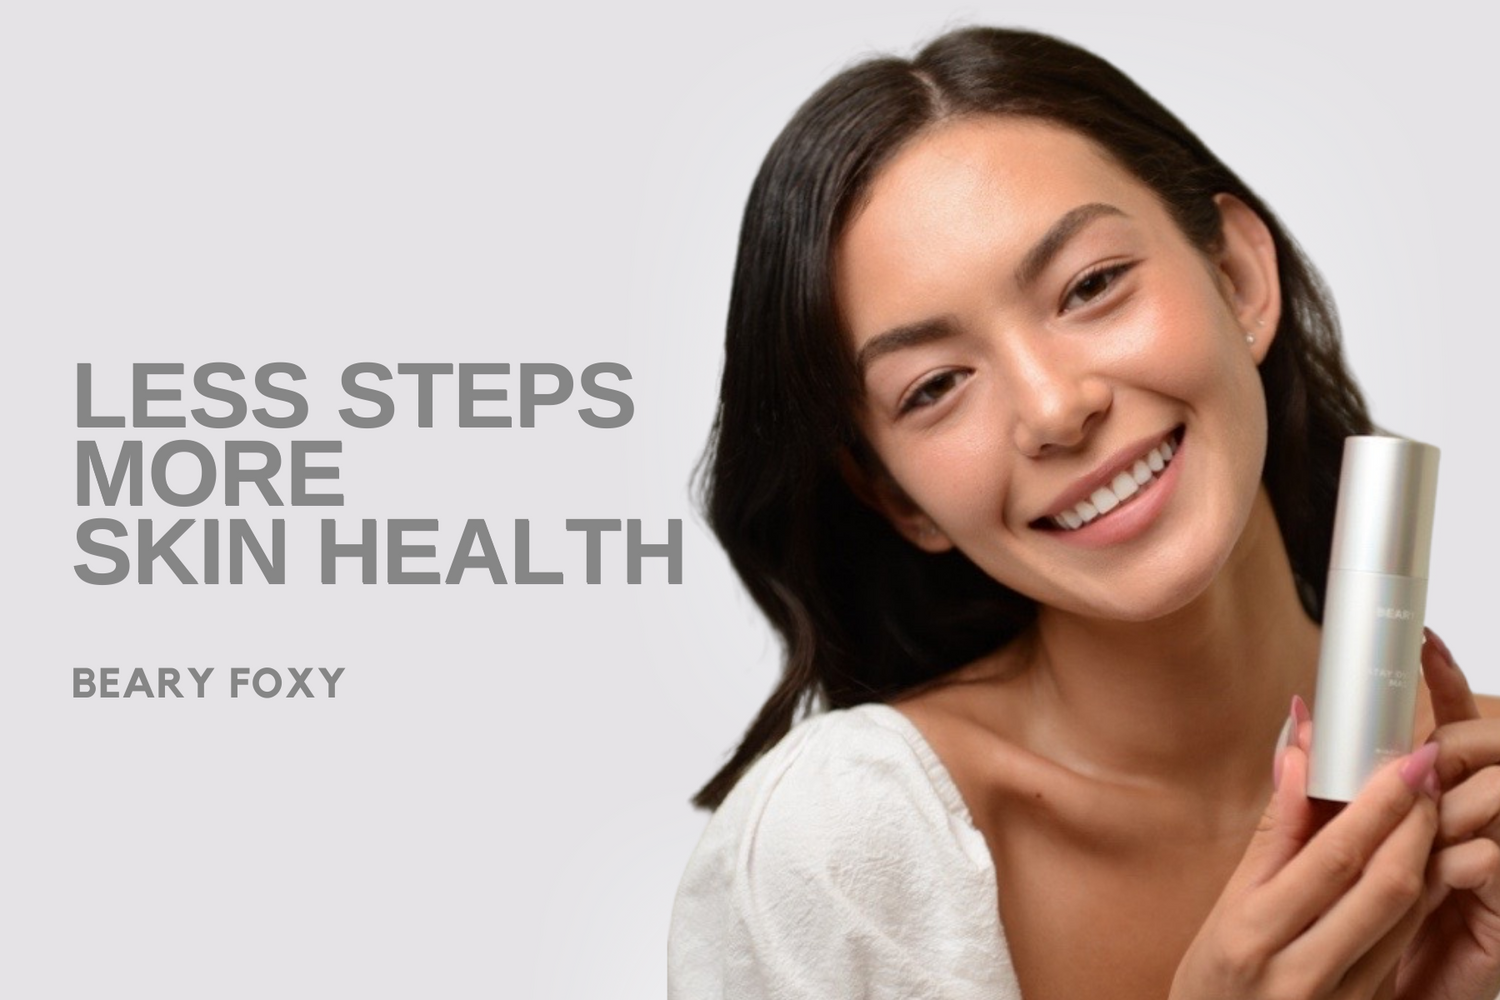 Beary Foxy, Skin care for less steps and more skin health